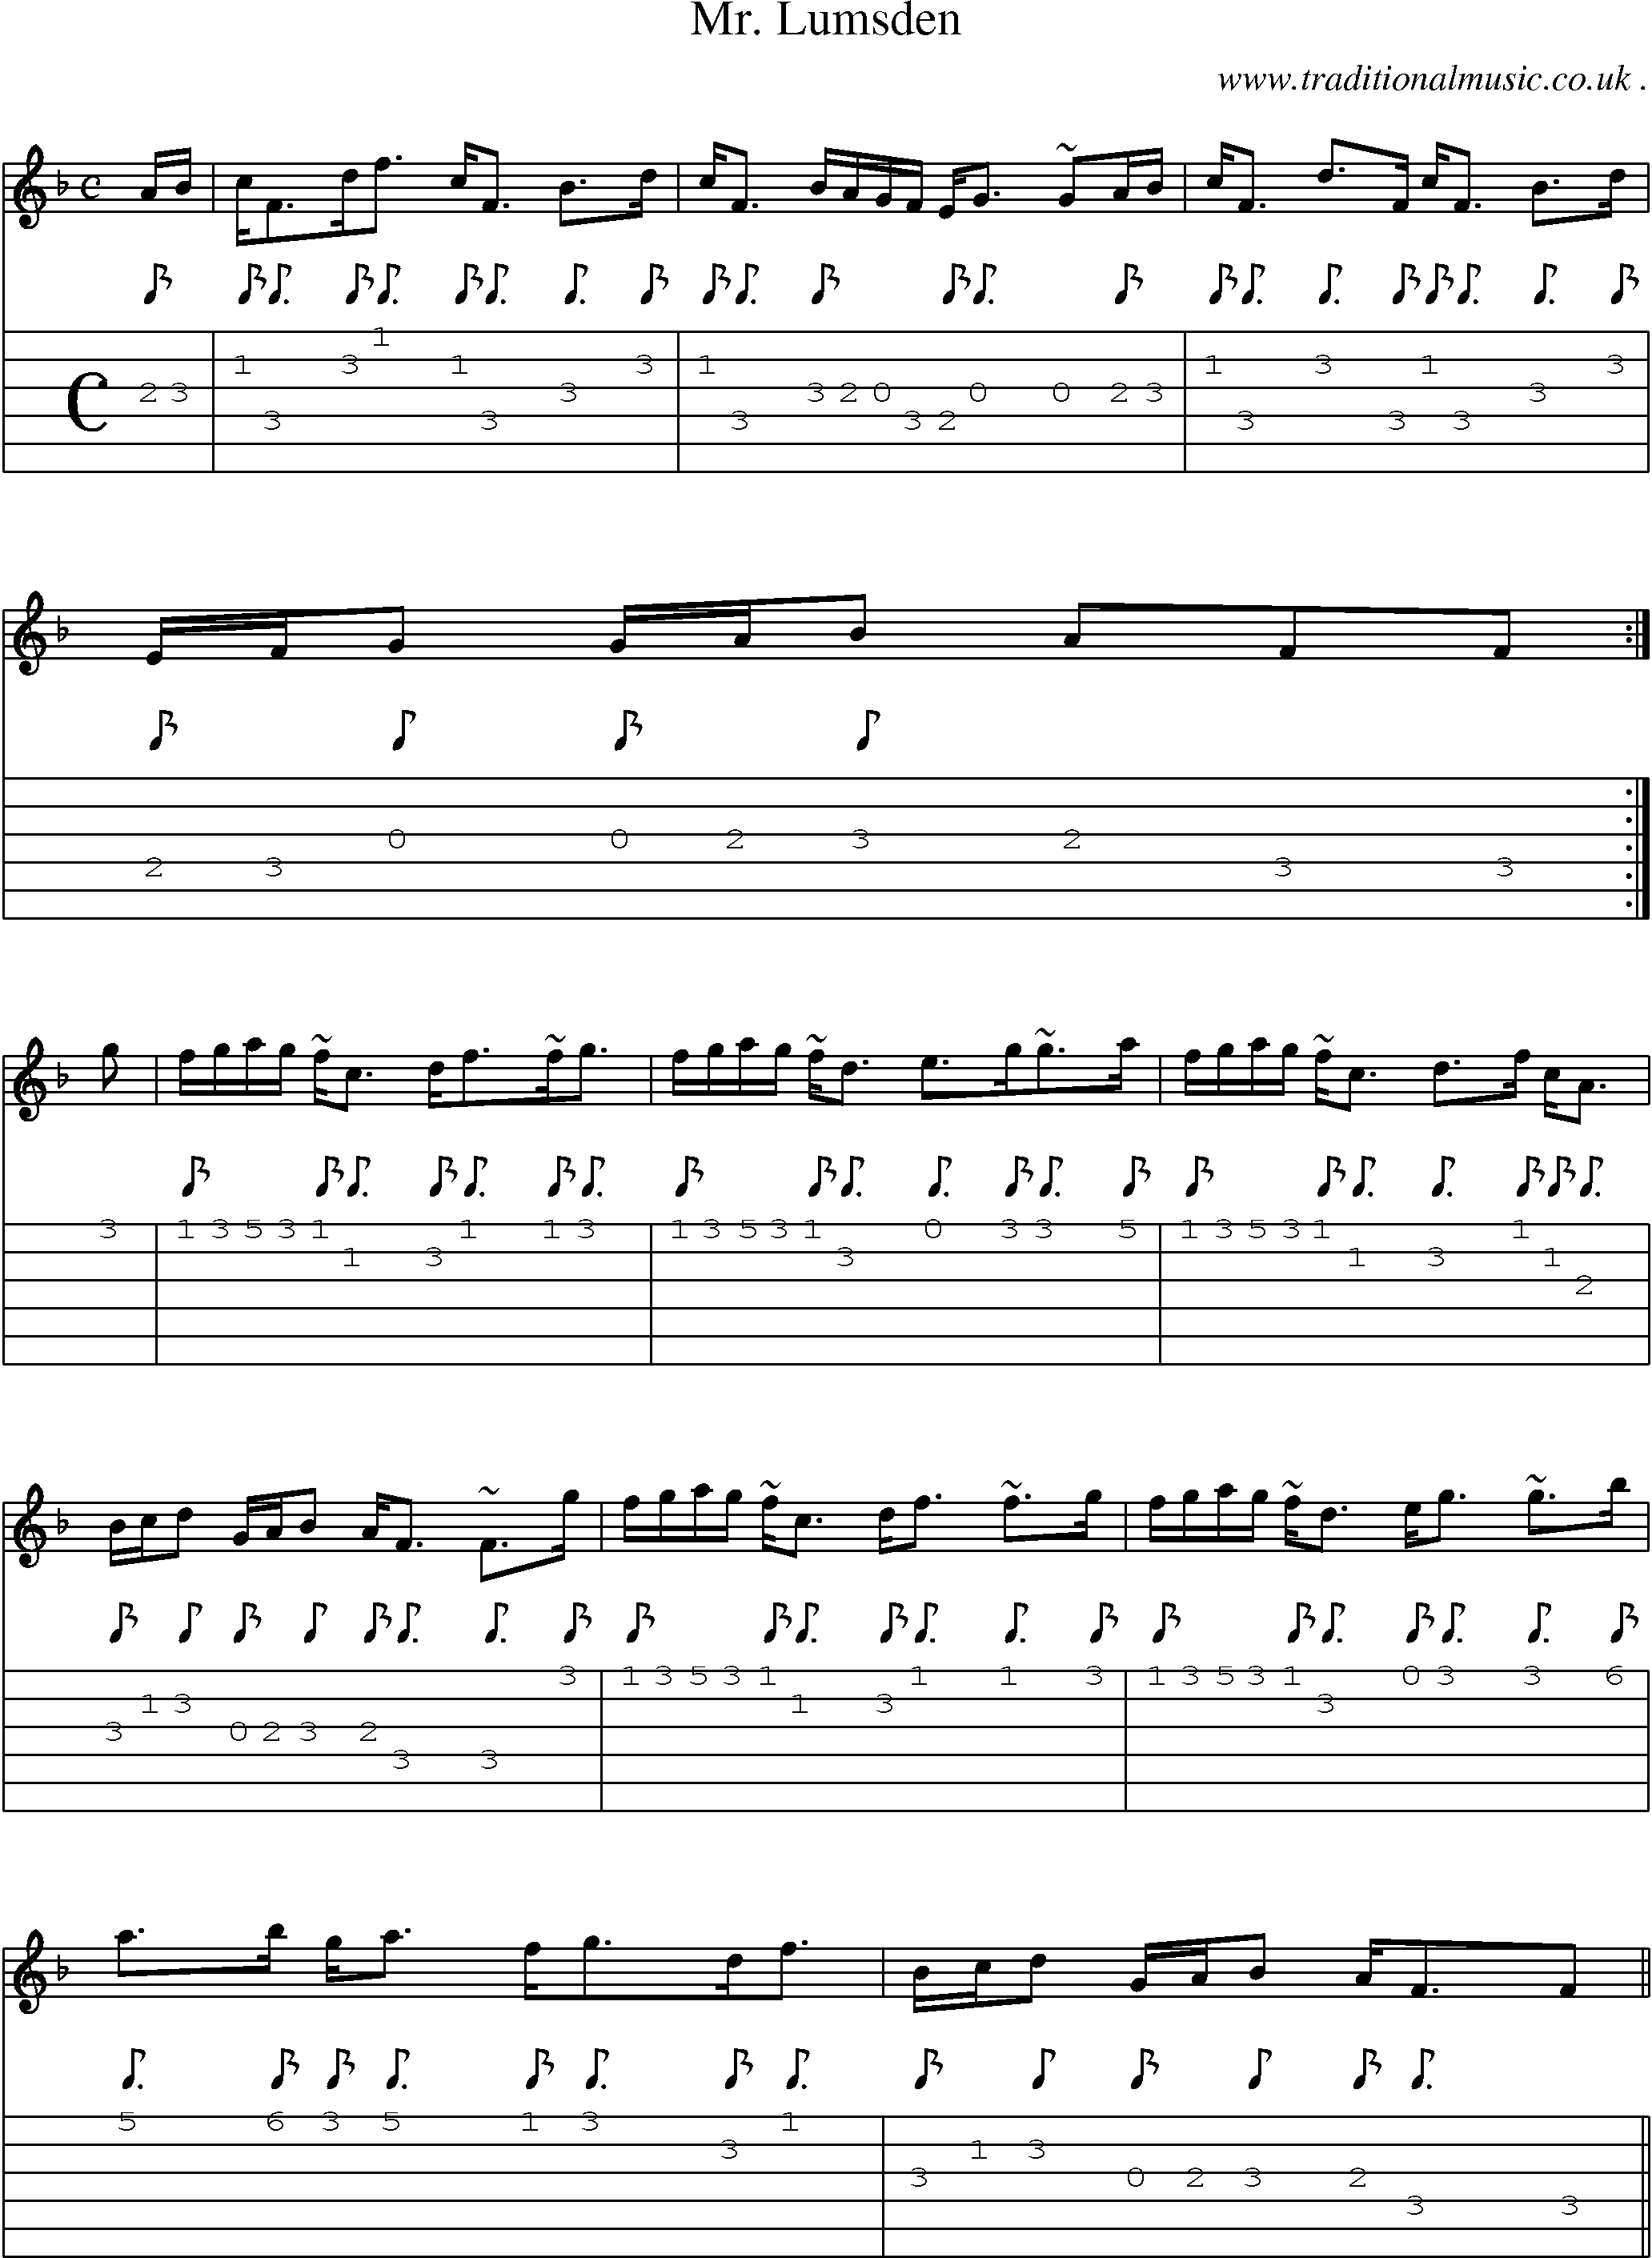 Sheet-music  score, Chords and Guitar Tabs for Mr Lumsden